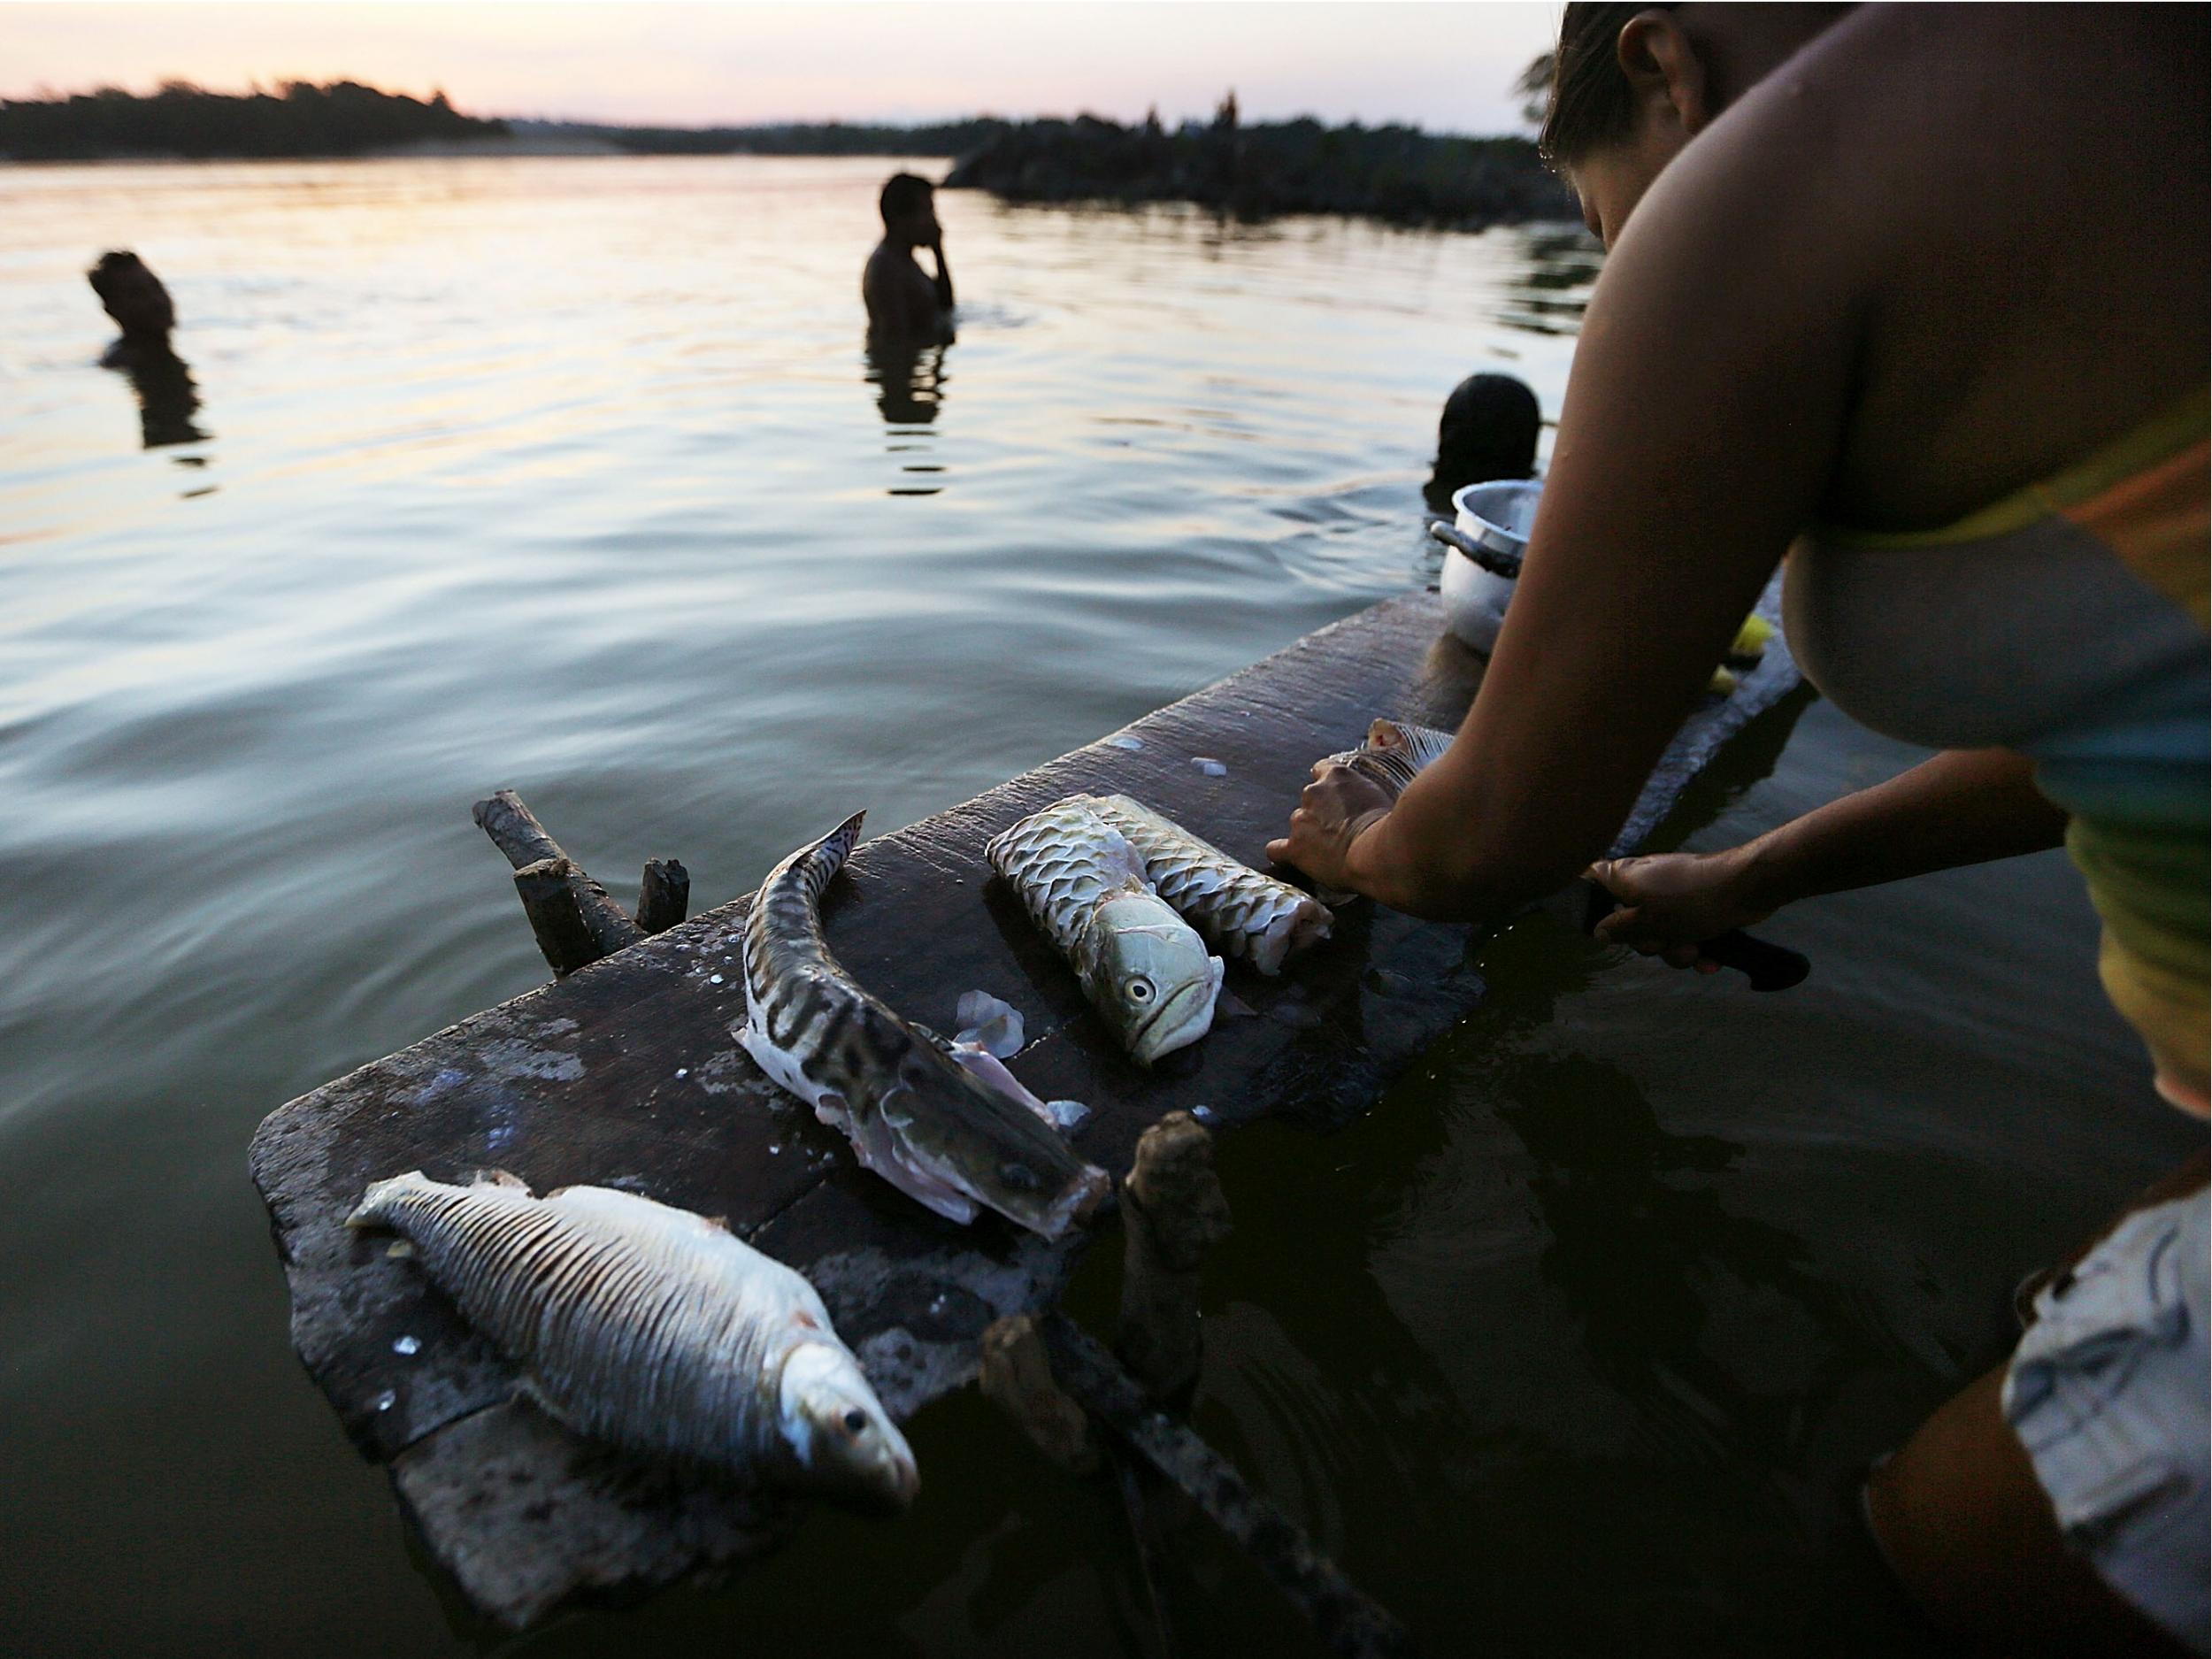 A villager prepares fish on the Tapajos River in the Amazon Rainforest, Brazil